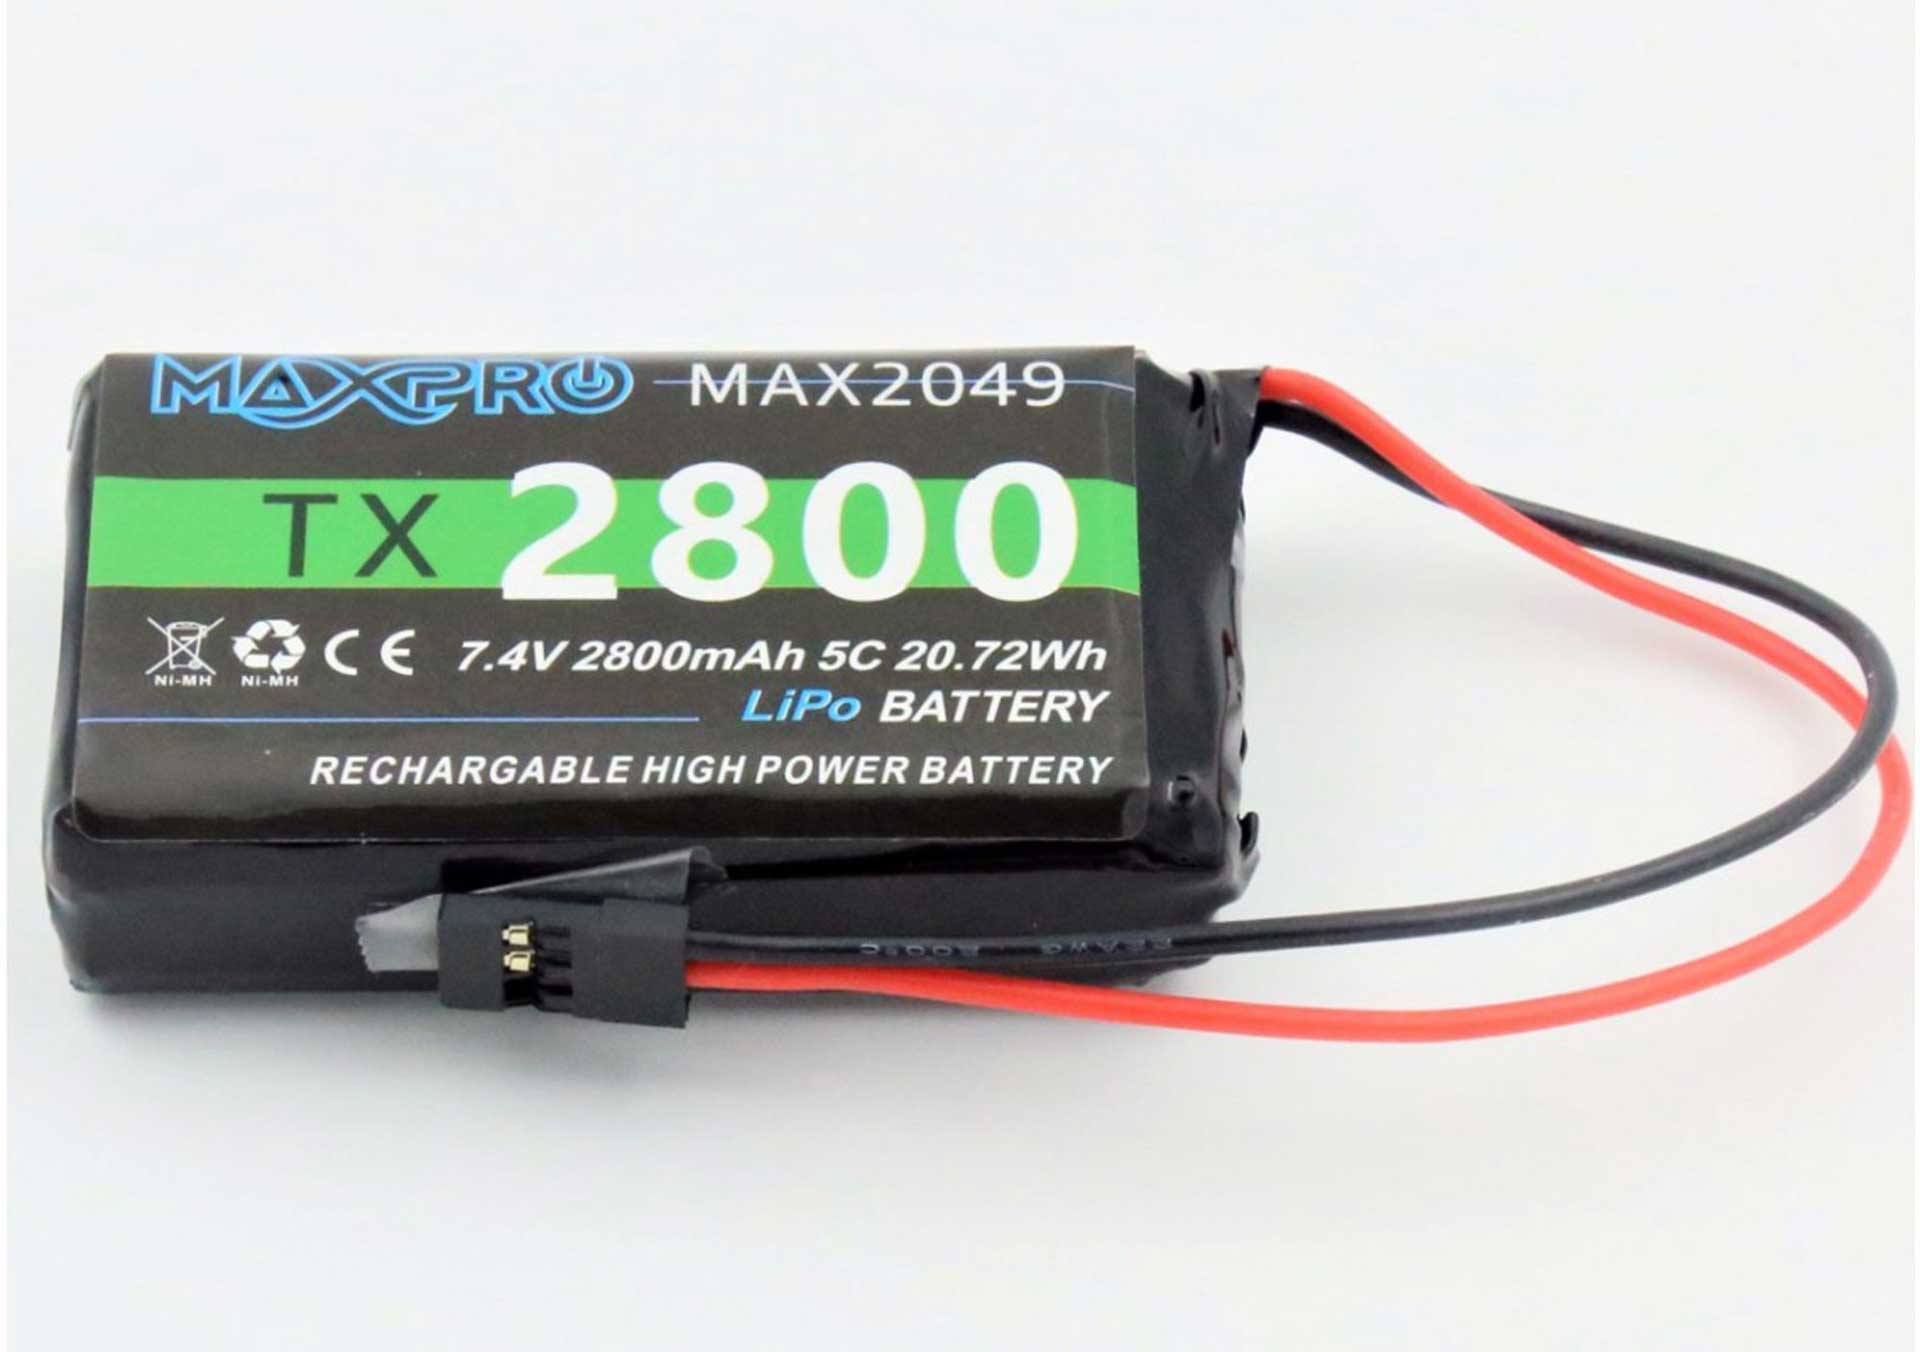 ACT TRANSMITTER BATTERY LIPO 7,4V 2800MAH WITH BALANCE MAXPRO SUITABLE FOR T6K, T12K, T16SZ, FX20 TO 36.....